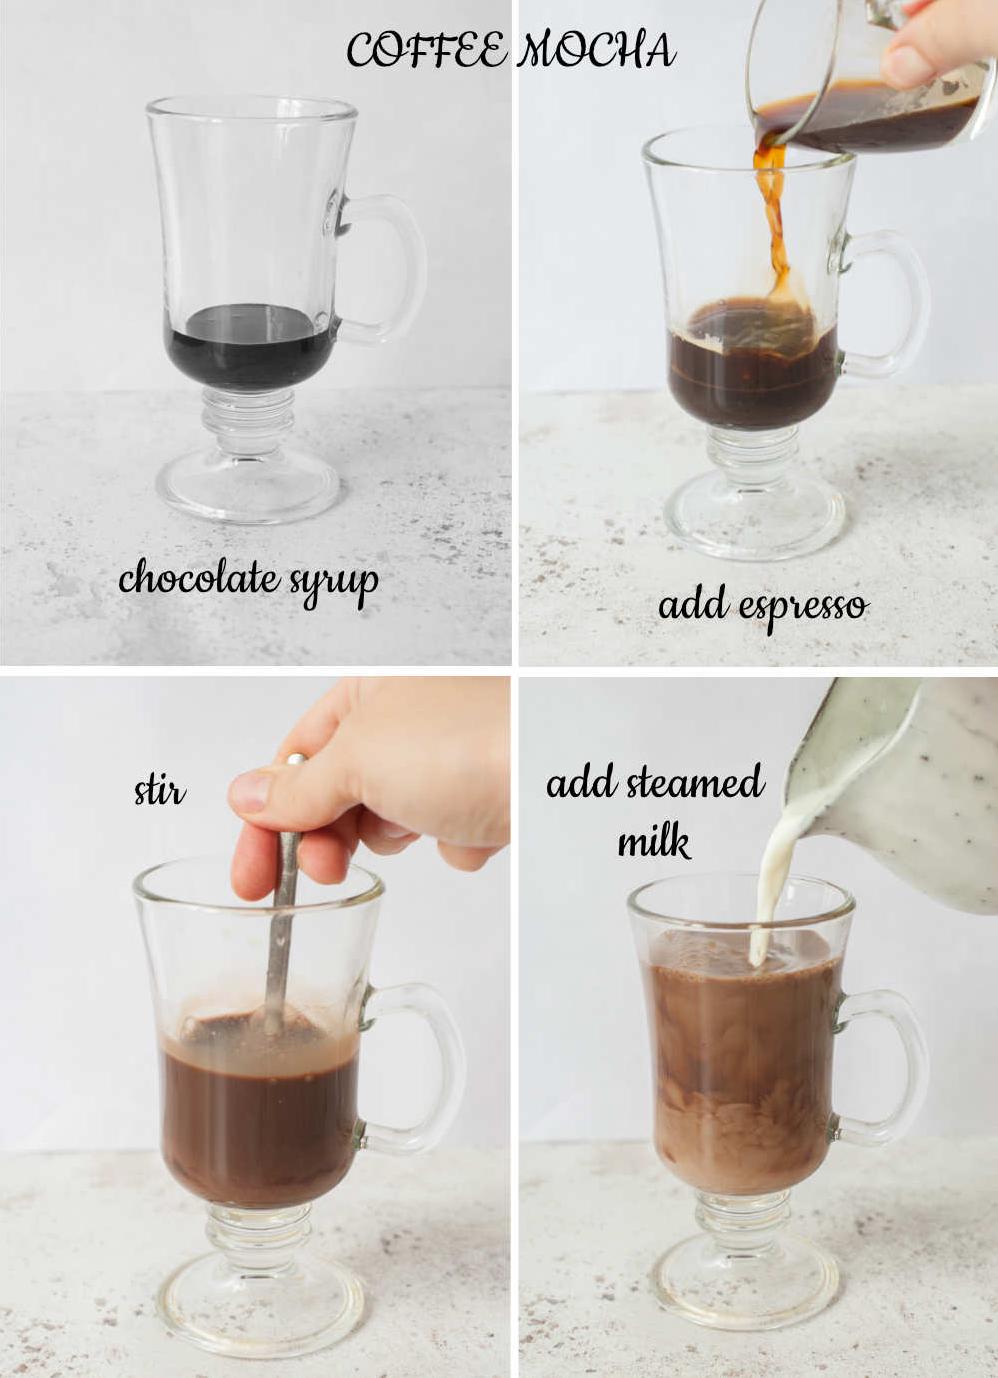  Dive into this decadent espresso and chocolate mix.